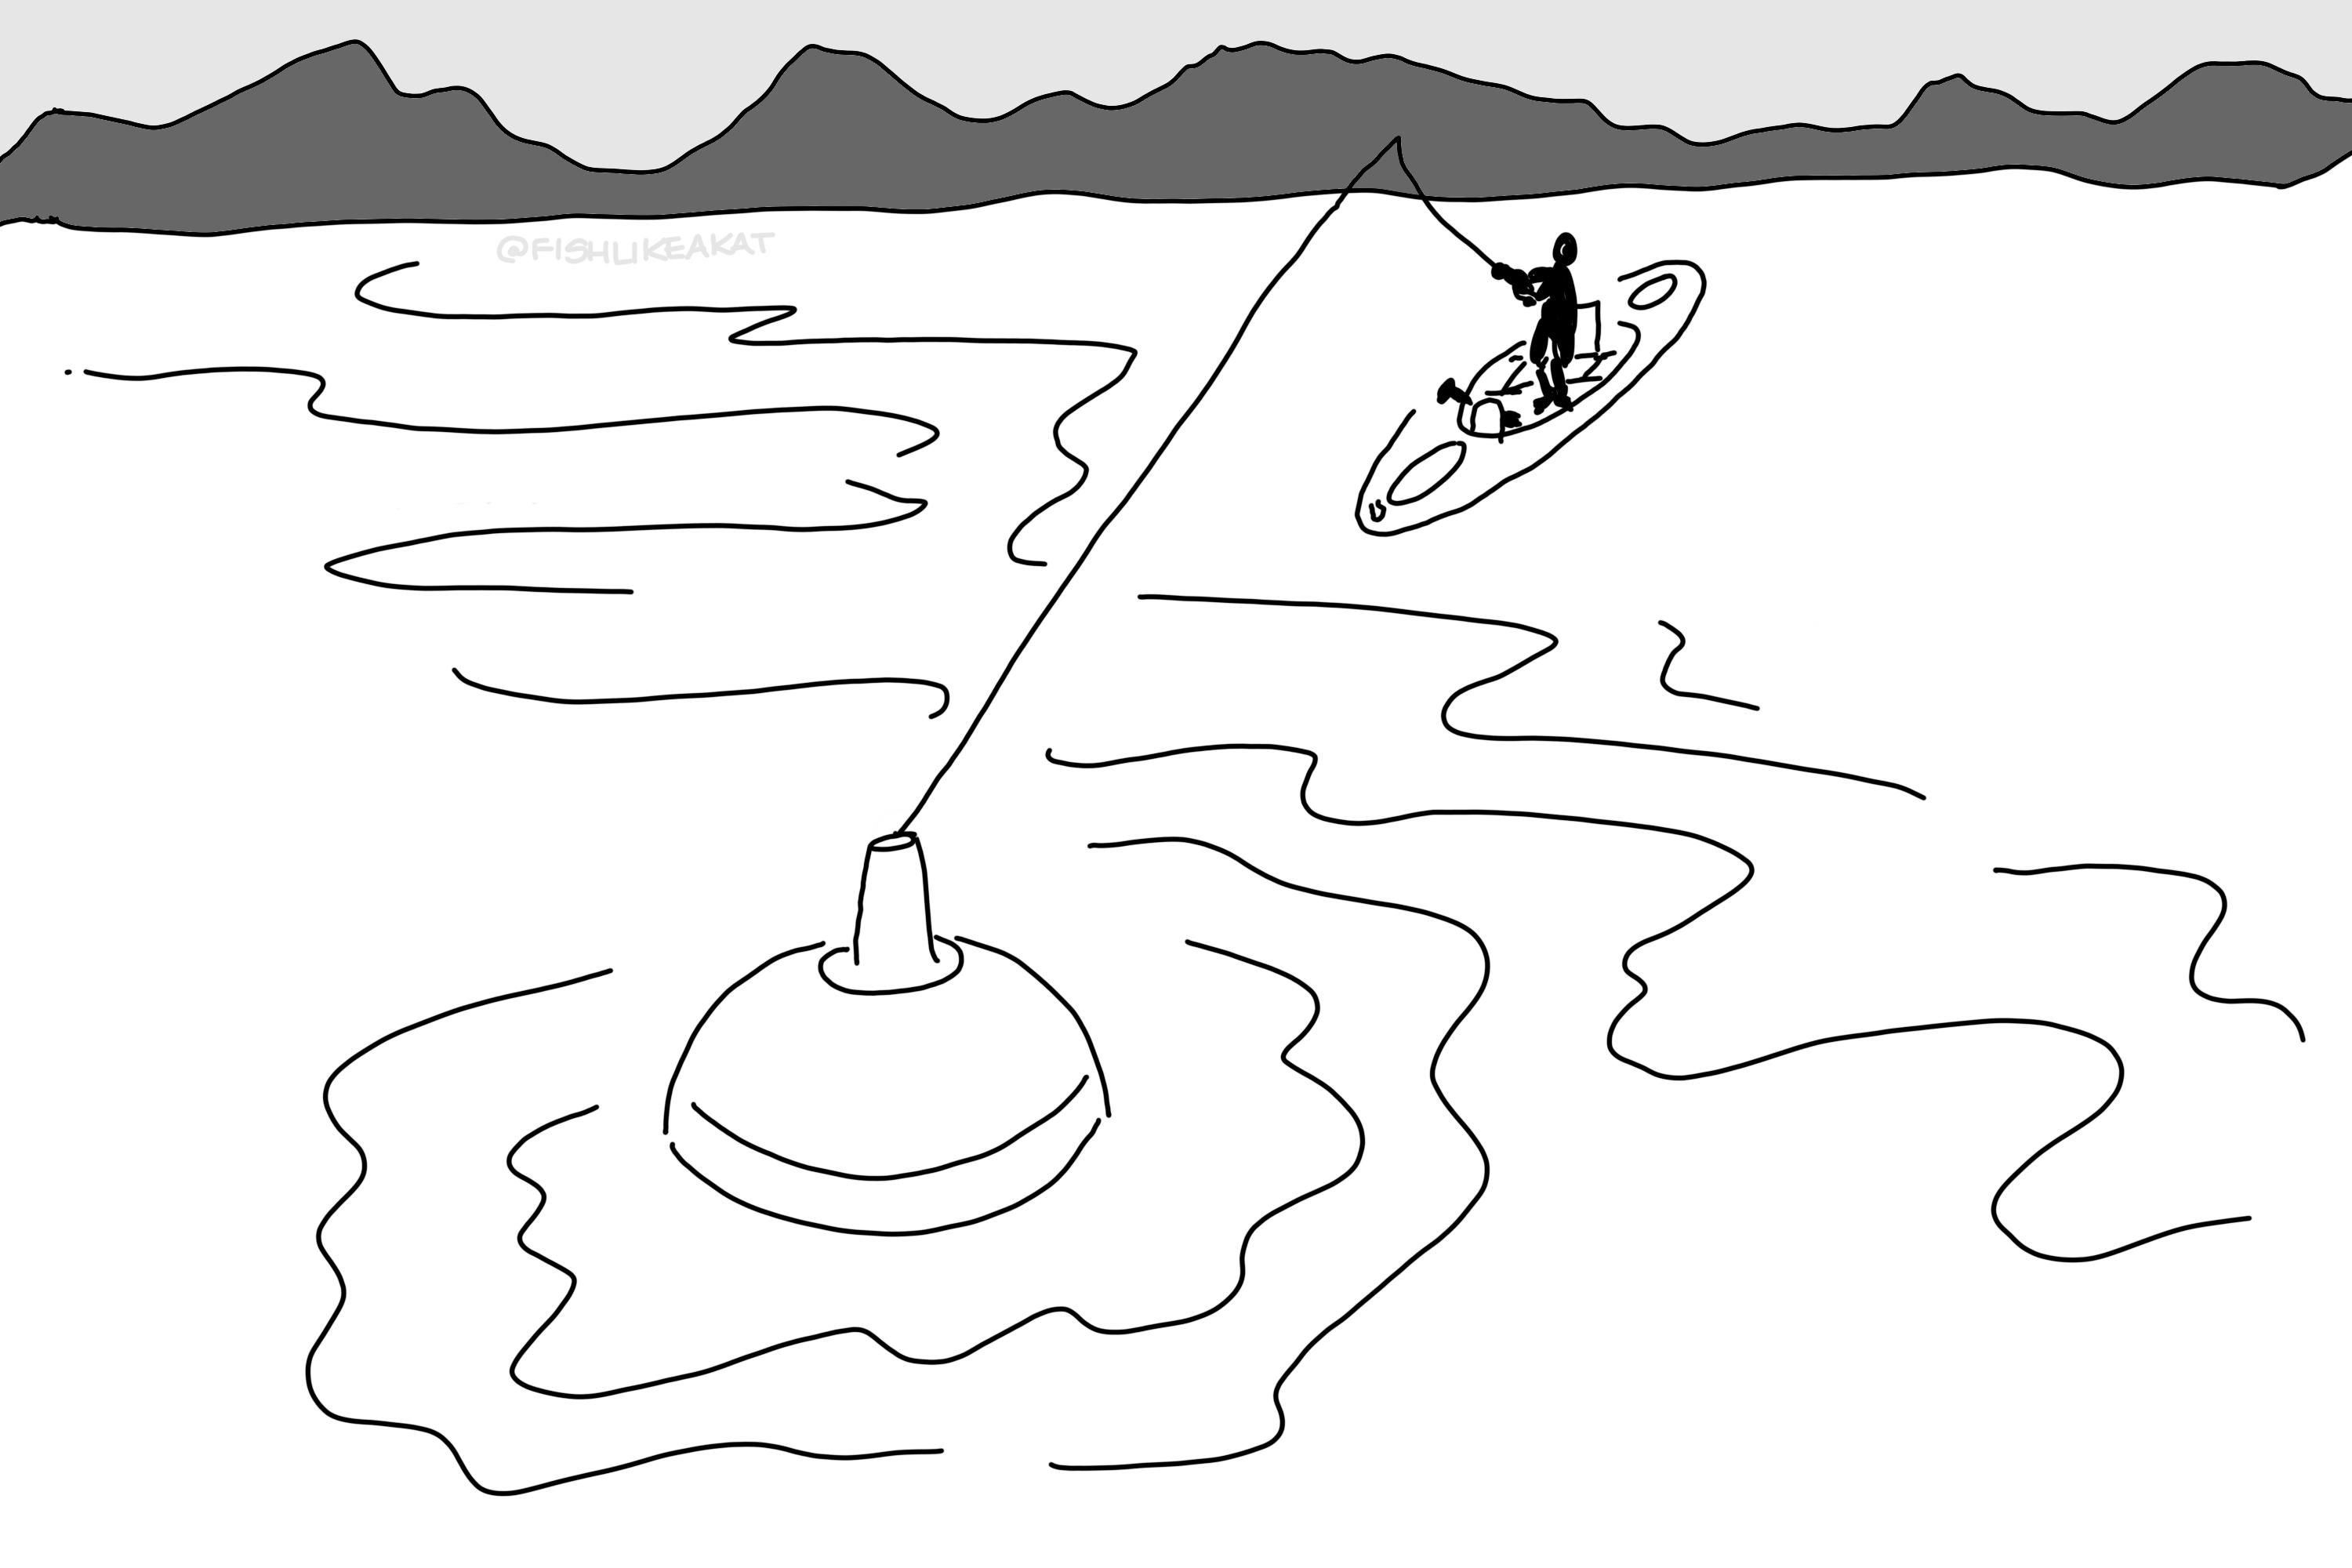 Coloring page with a closeup of a bobber cast into the water by a kayak angler